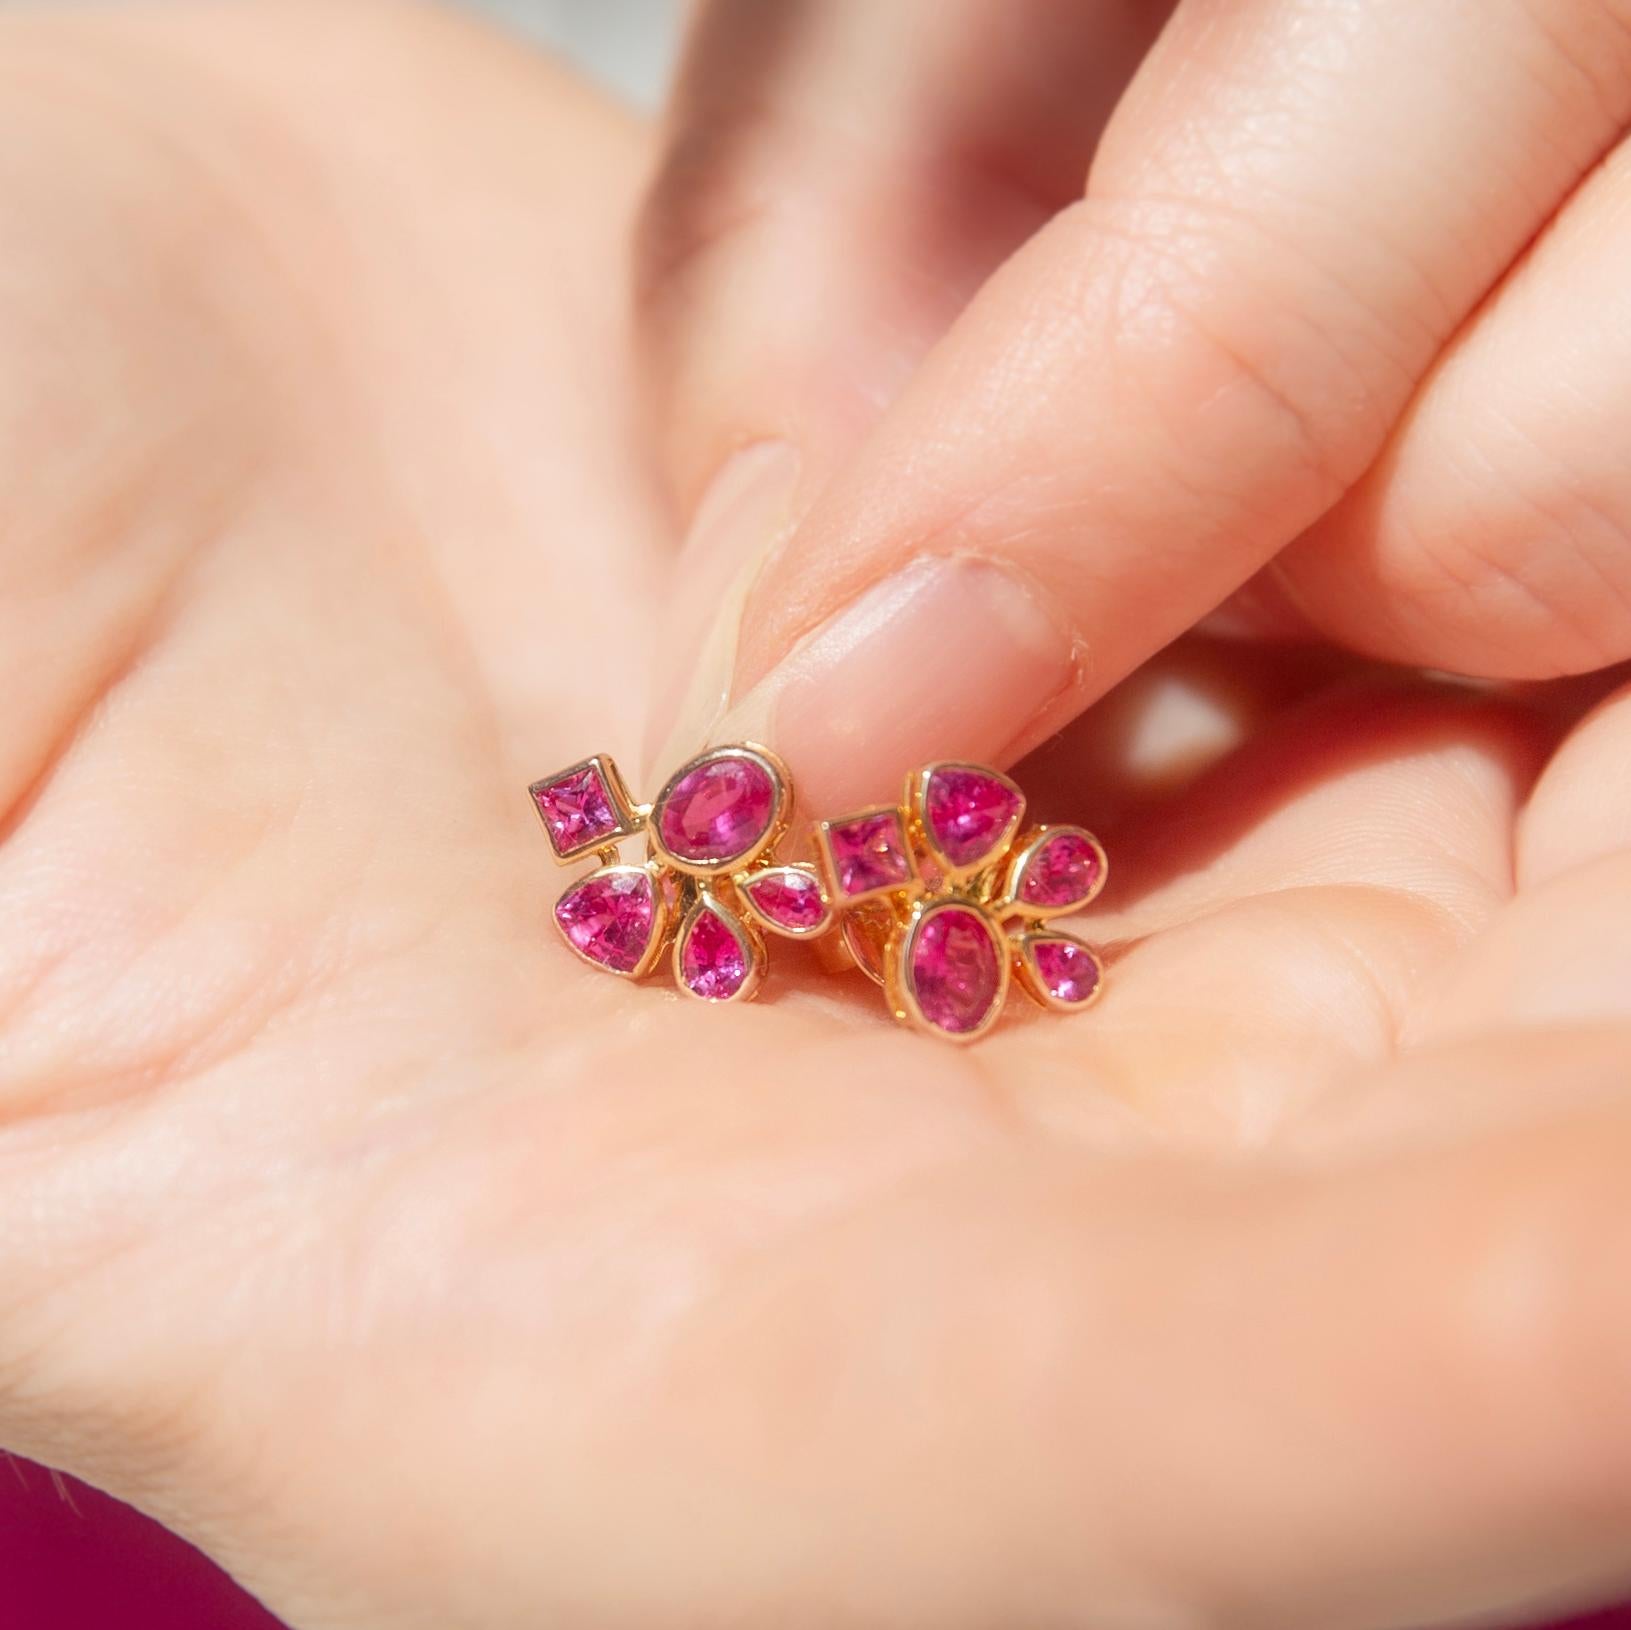 SOUL COLOUR

My soul colour is fuchsia
My soul dances
It laughs and cries
In fuchsia

Soul Colour Gem Details
The ten faceted bright vivid pinkish red rubies are in the shapes of oval, pear, cushion and trilliant.

Size
Each earring measures